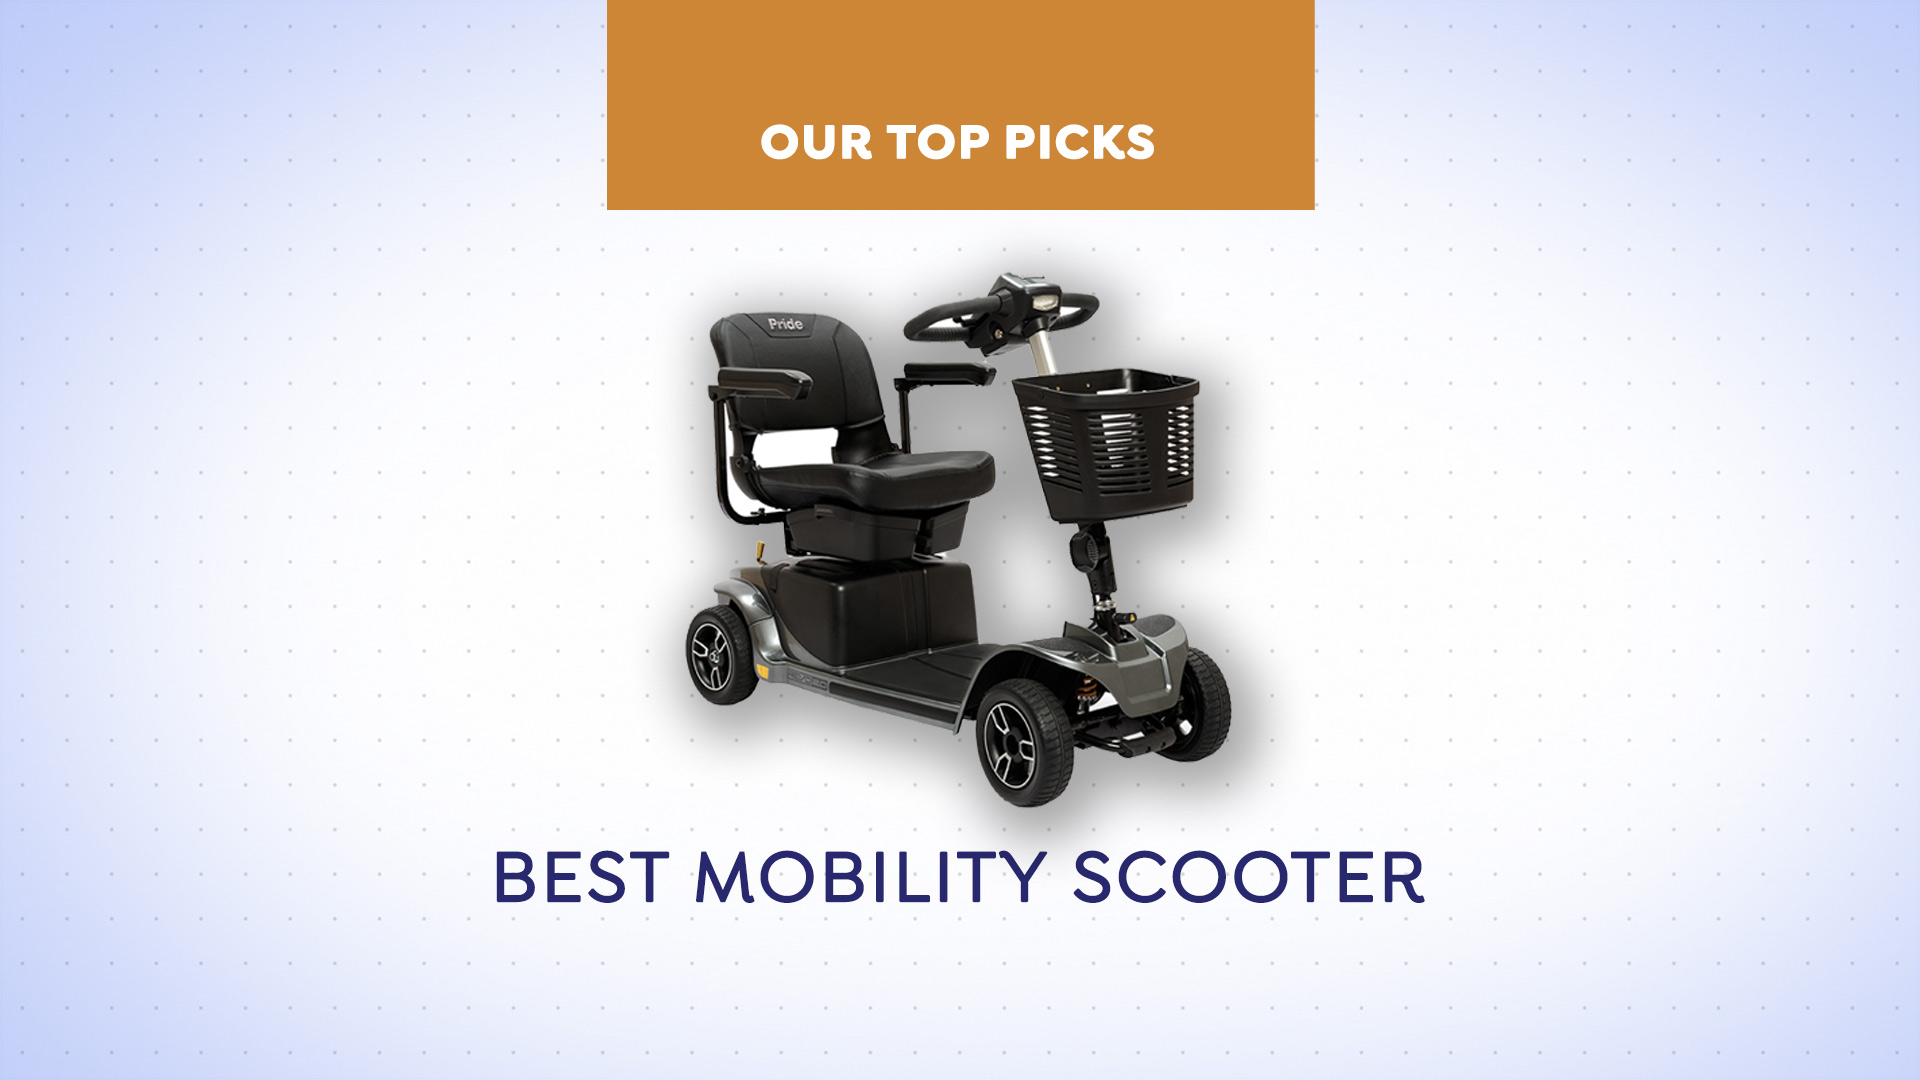 Best Mobility Scooter Review